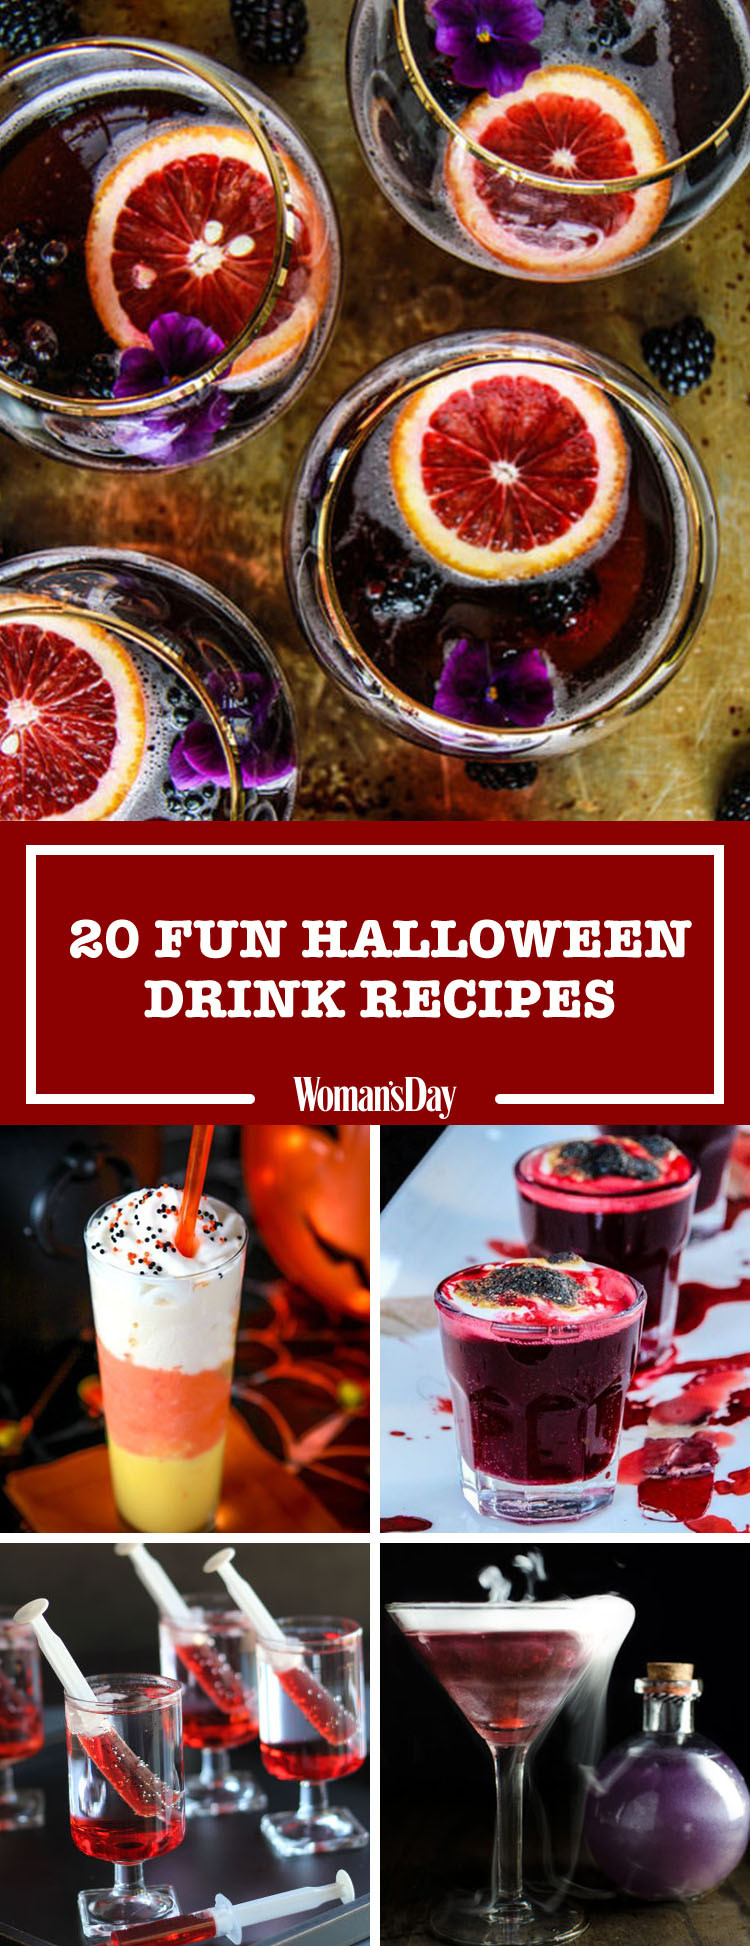 Easy Halloween Drinks
 25 Easy Halloween Cocktails & Drinks Recipes for